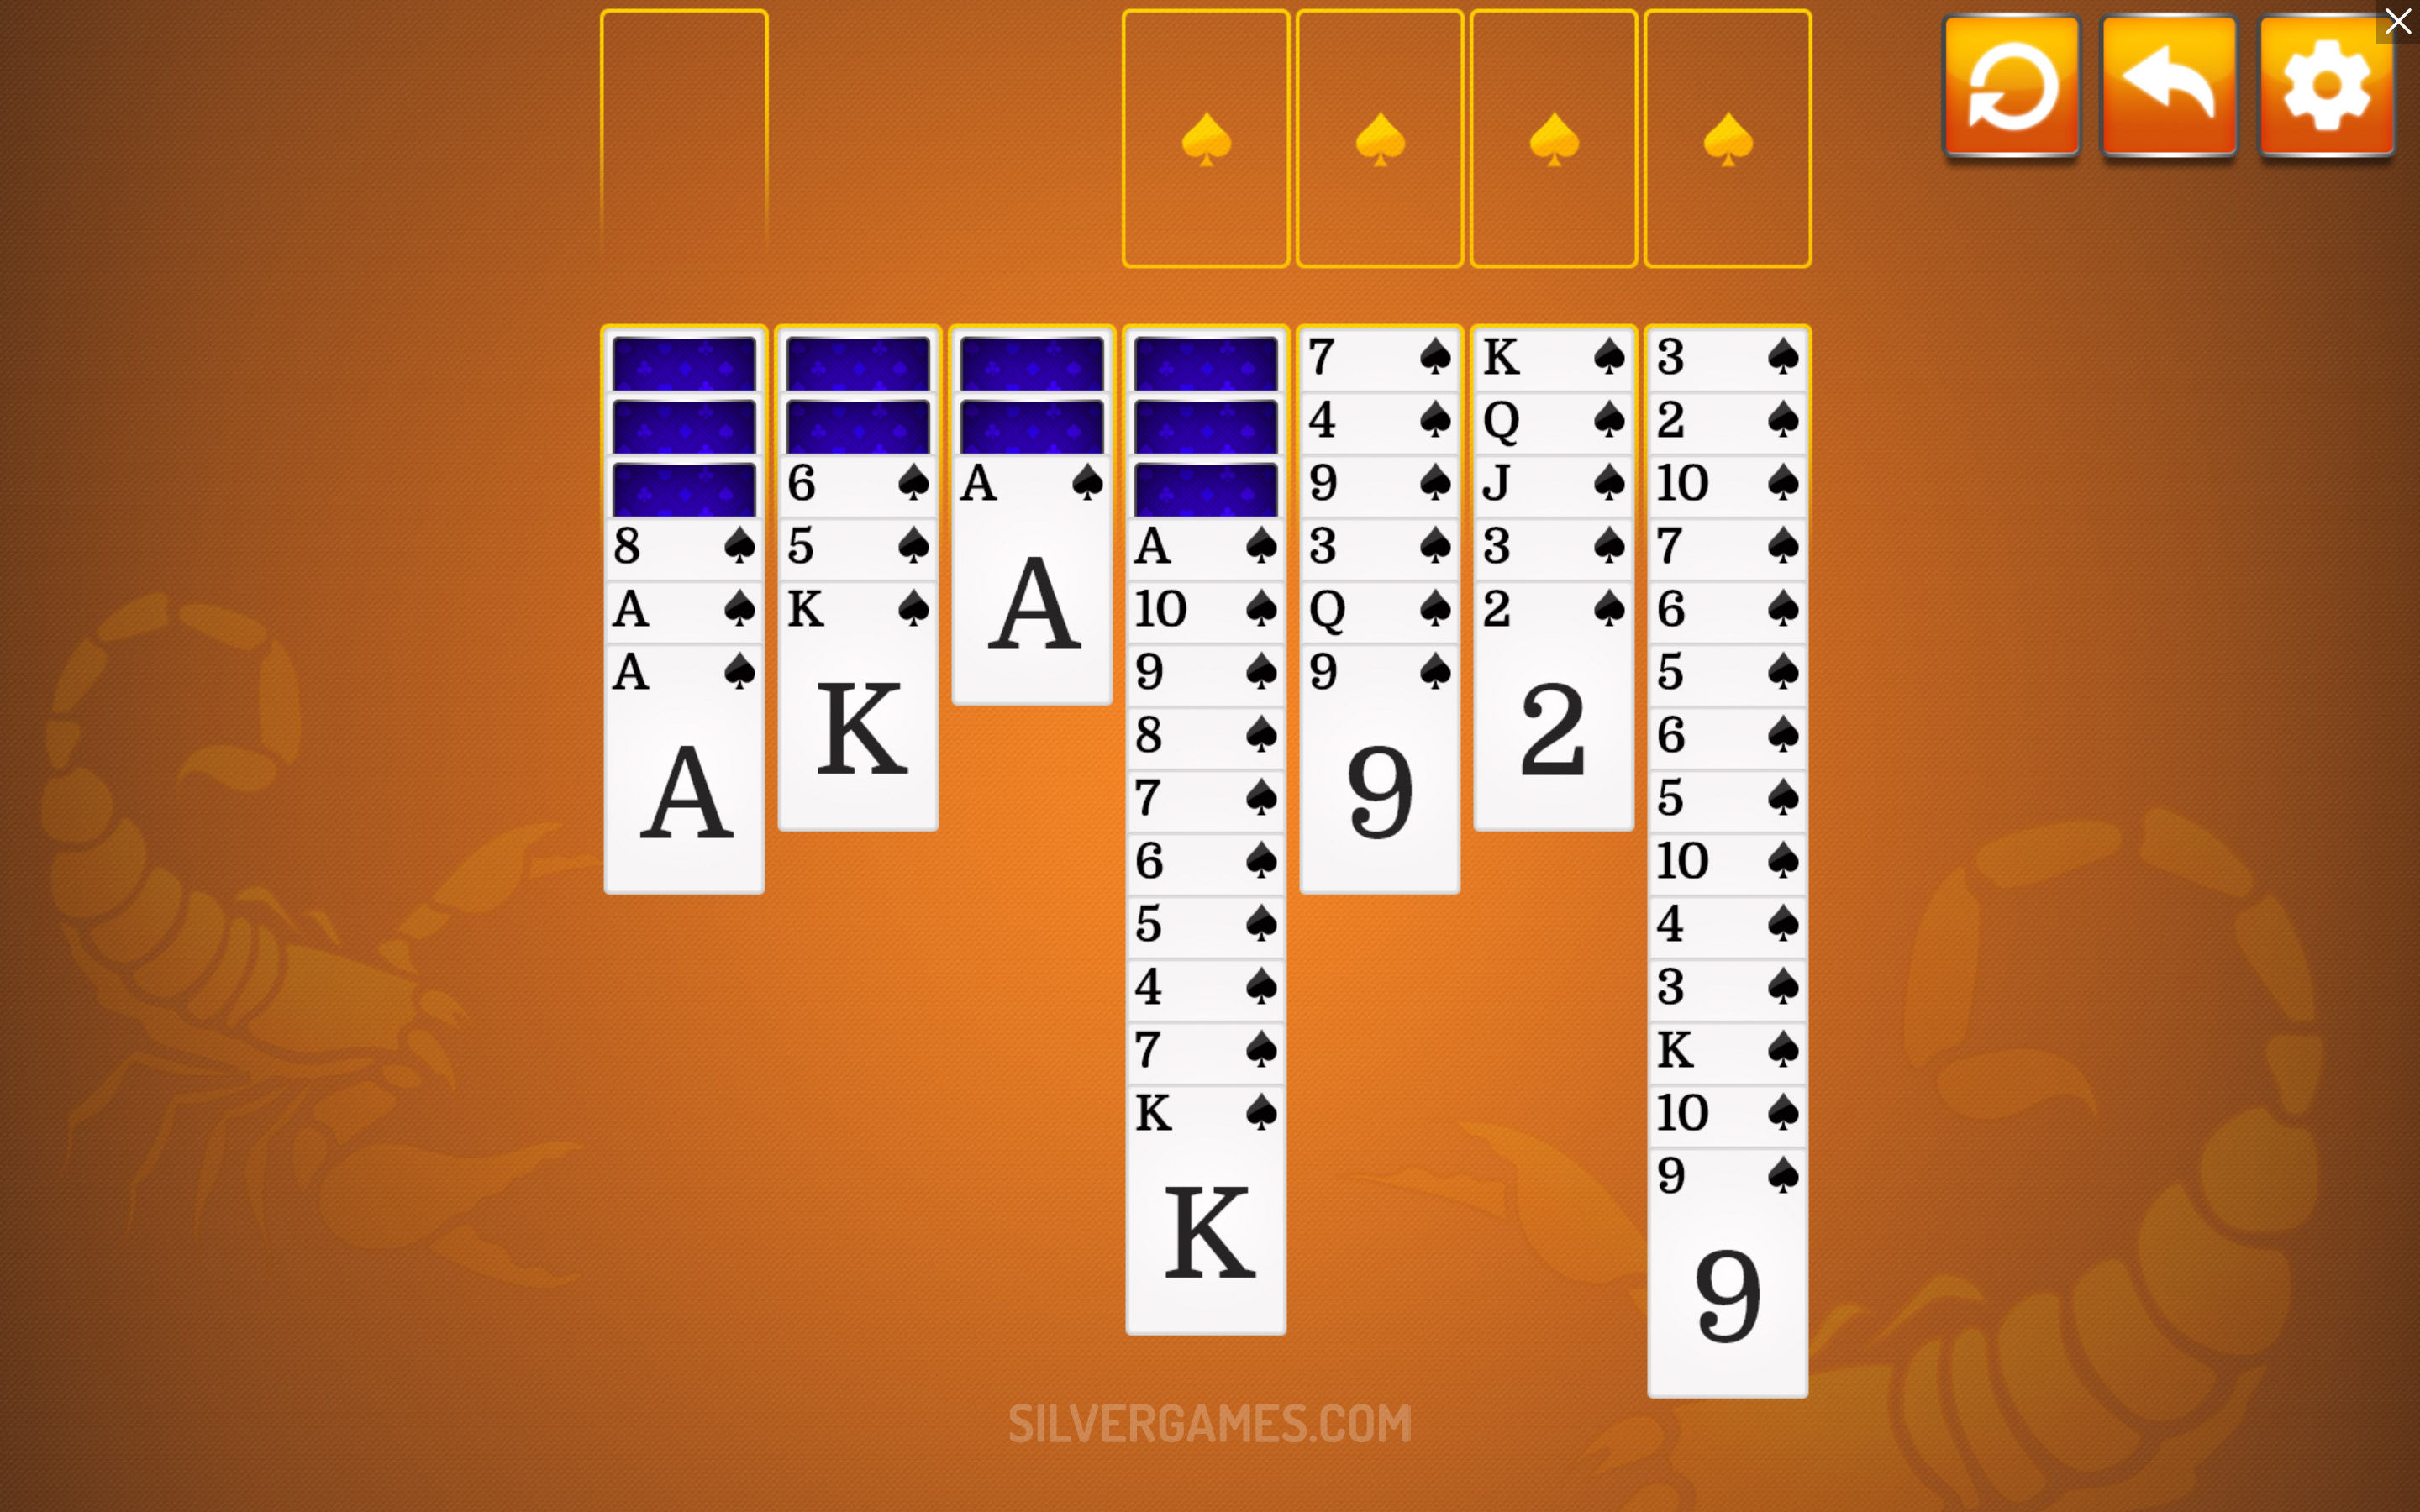 scorpion solitaire play online